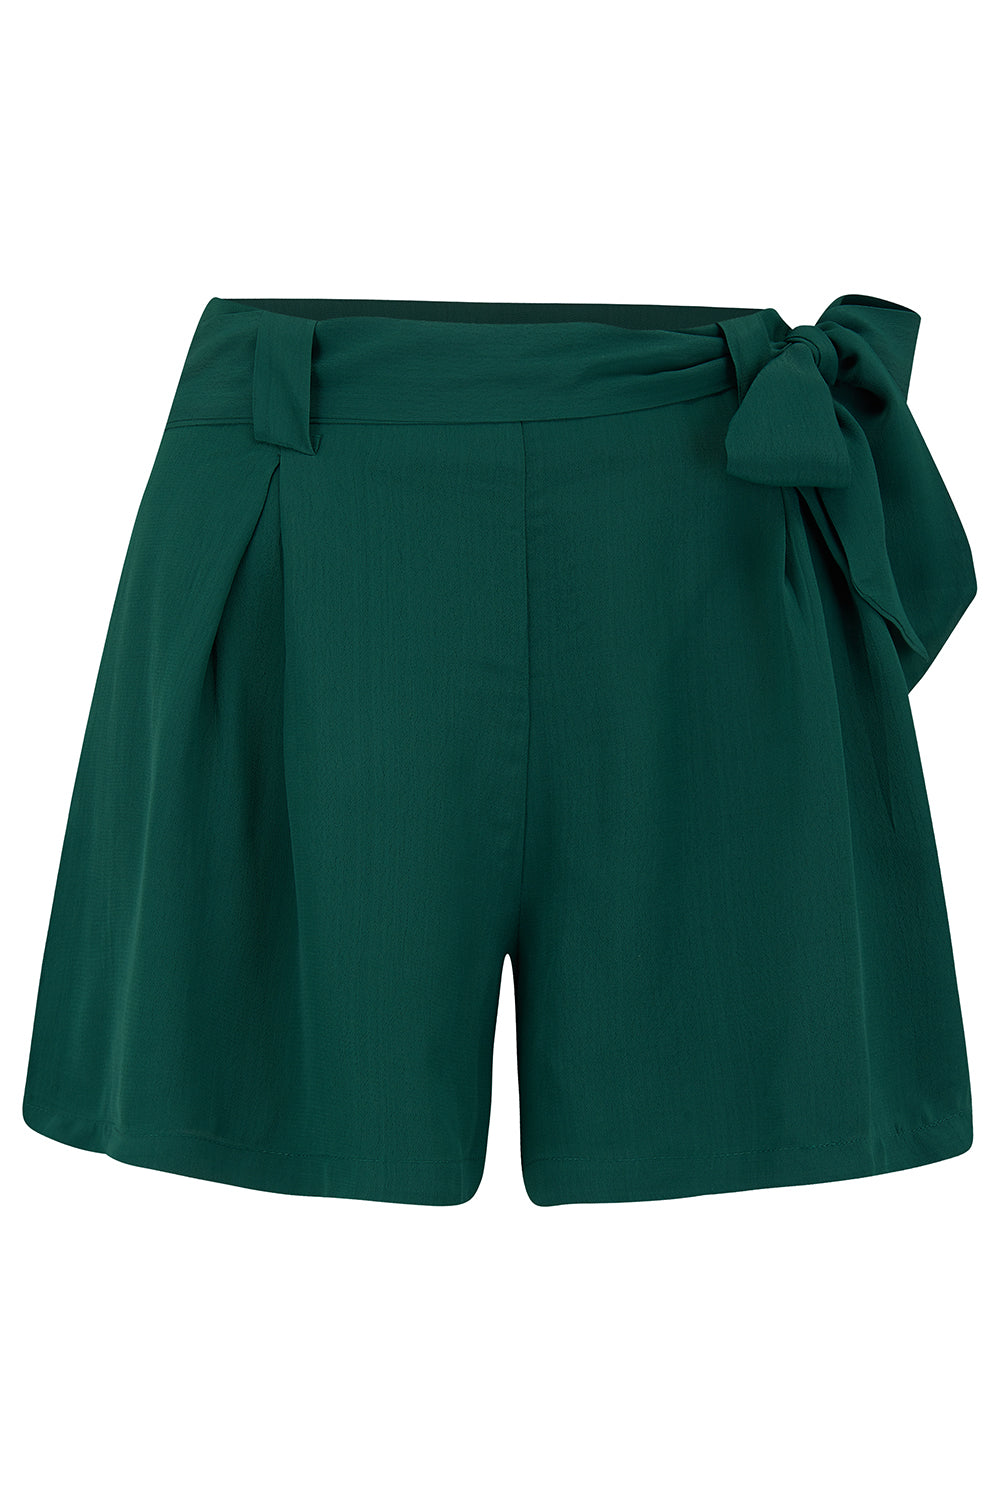 Emma vintage styled Tap Shorts in Green - True and authentic vintage style clothing, inspired by the Classic styles of CC41 , WW2 and the fun 1950s RocknRoll era, for everyday wear plus events like Goodwood Revival, Twinwood Festival and Viva Las Vegas Rockabilly Weekend Rock n Romance The Seamstress Of Bloomsbury